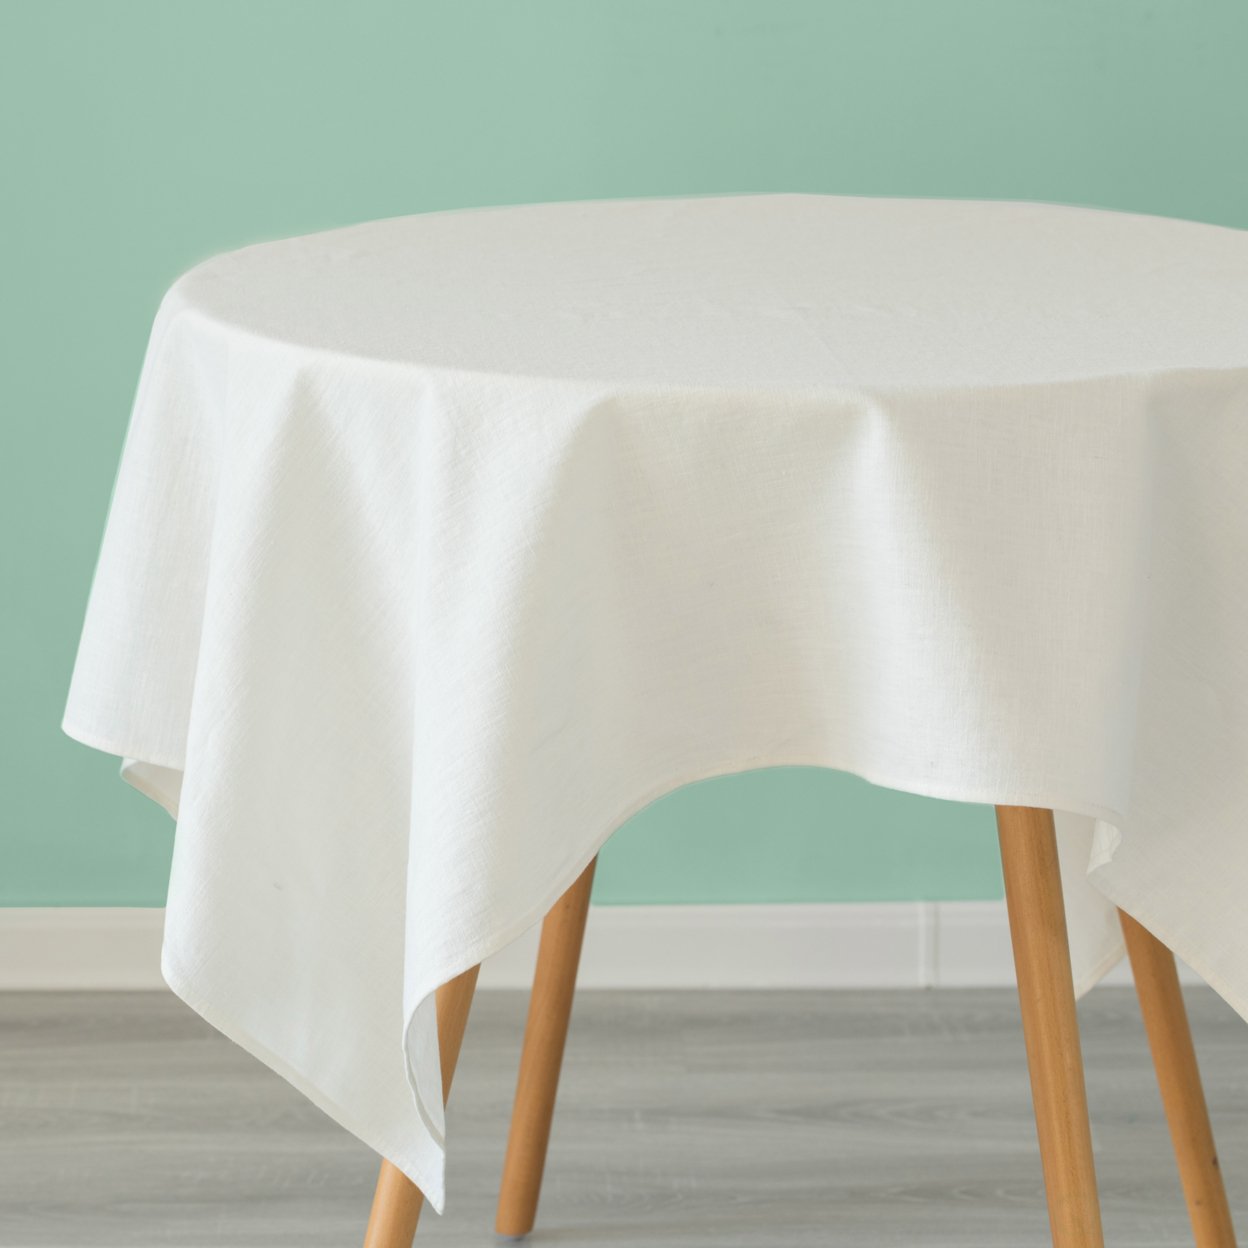 Deerlux 100 Percent Pure Linen Washable Tablecloth Solid Color - 52 X 70 In. White